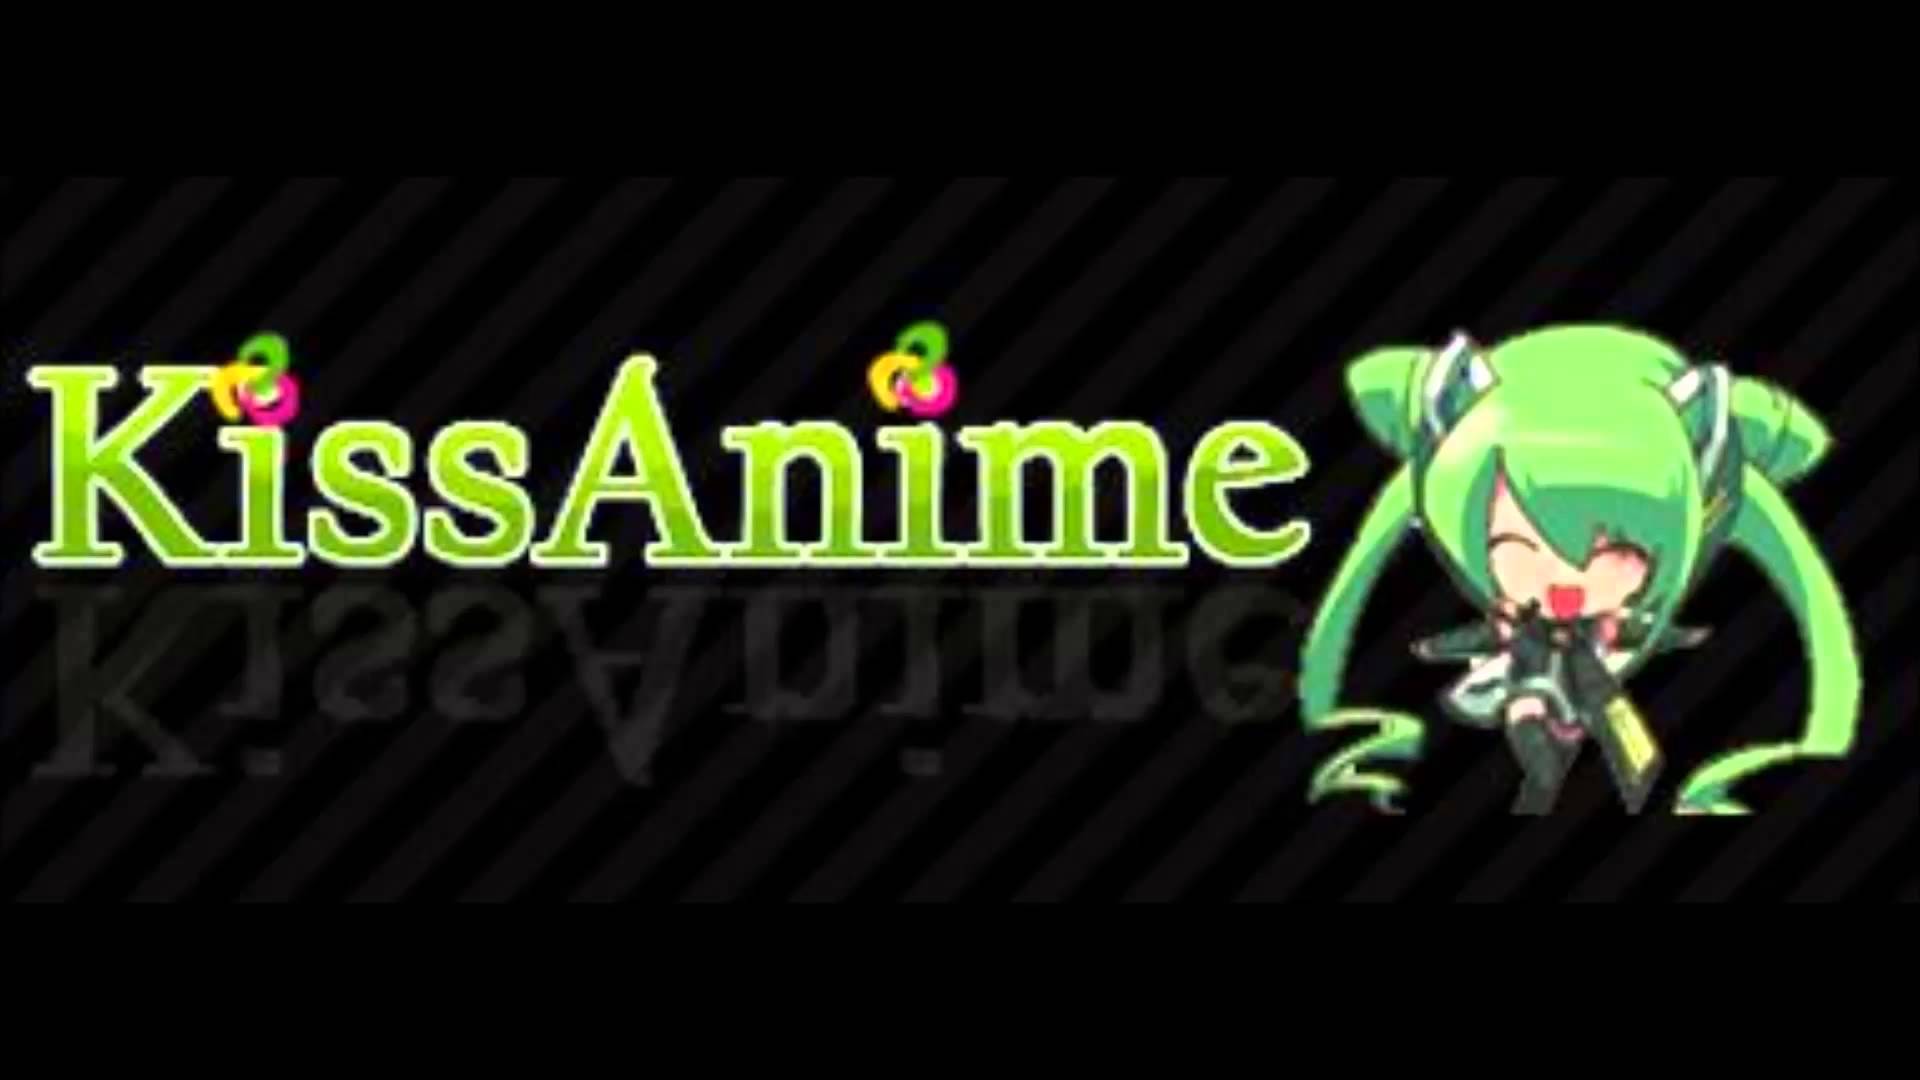 What Happened To Kissanime